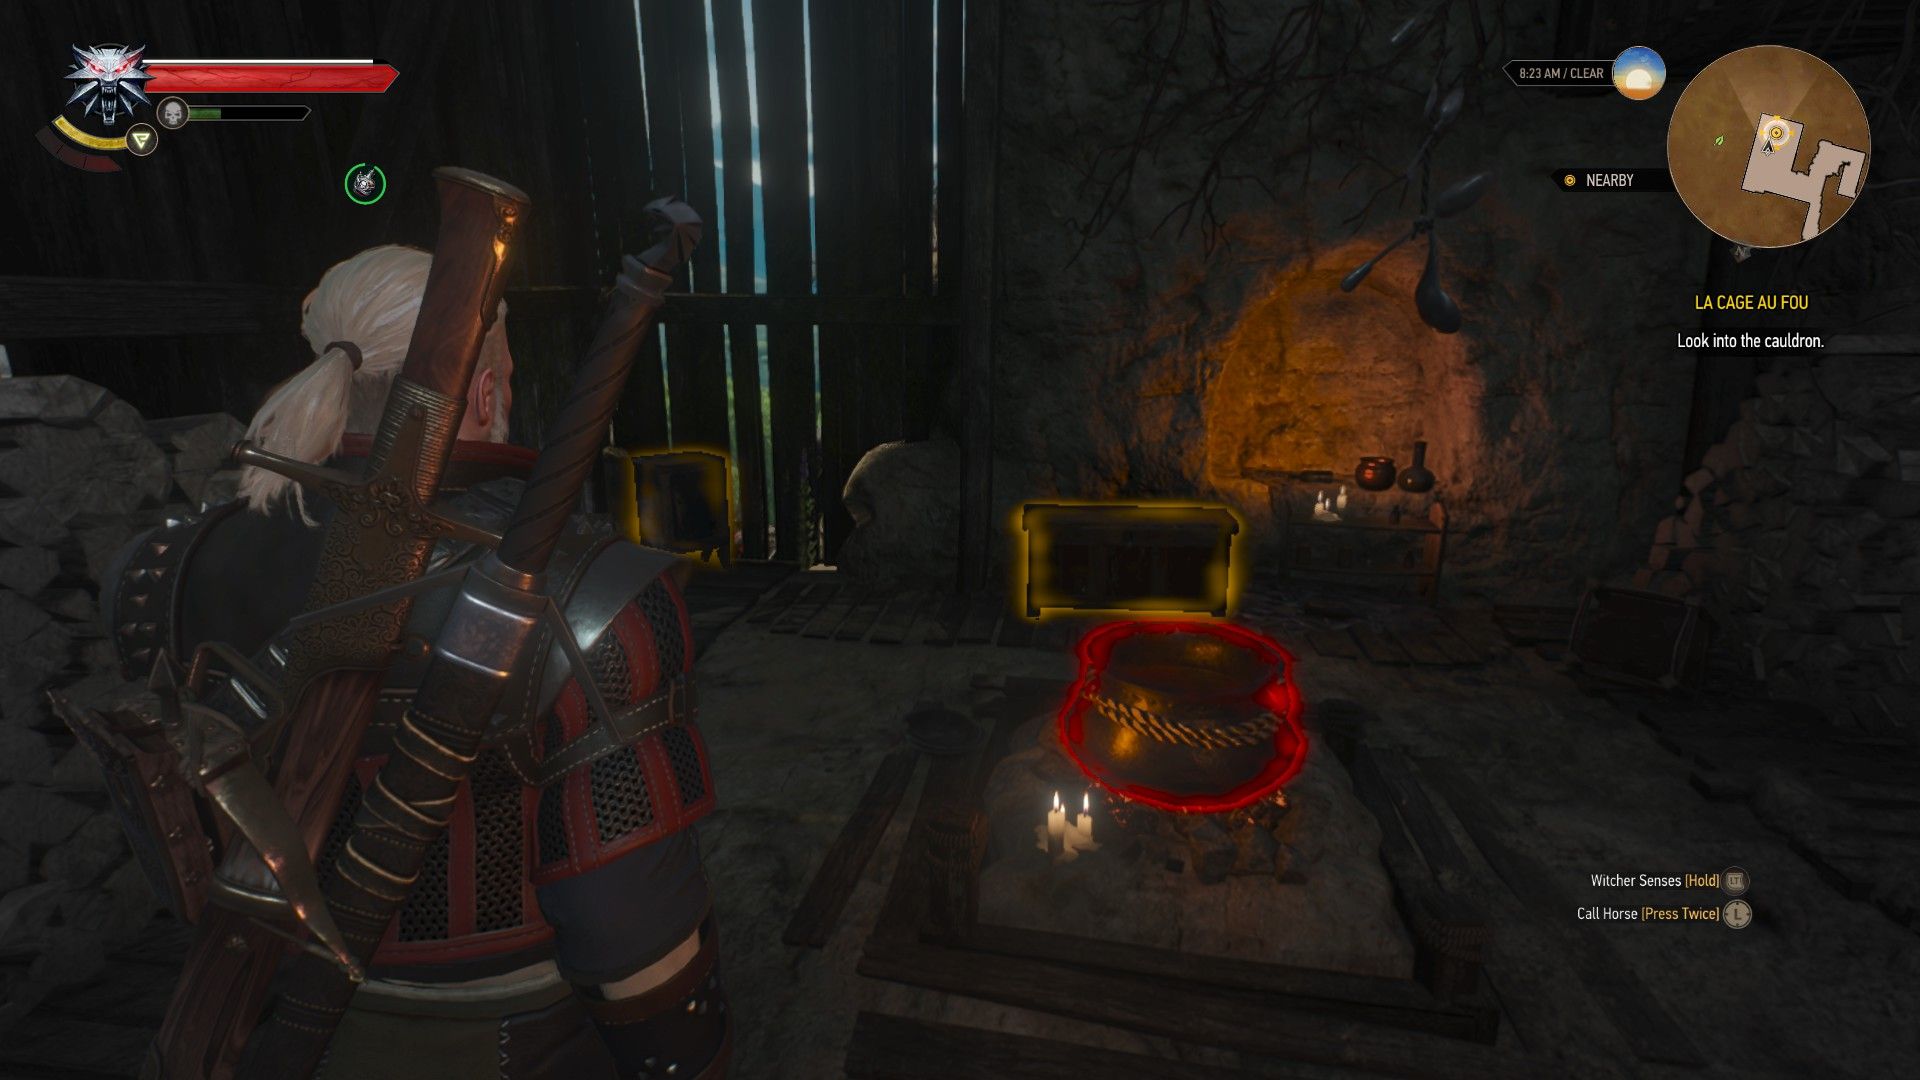 Screenshot of Geralt's Witcher Senses, with the cauldron required for the quest highlighted in red.